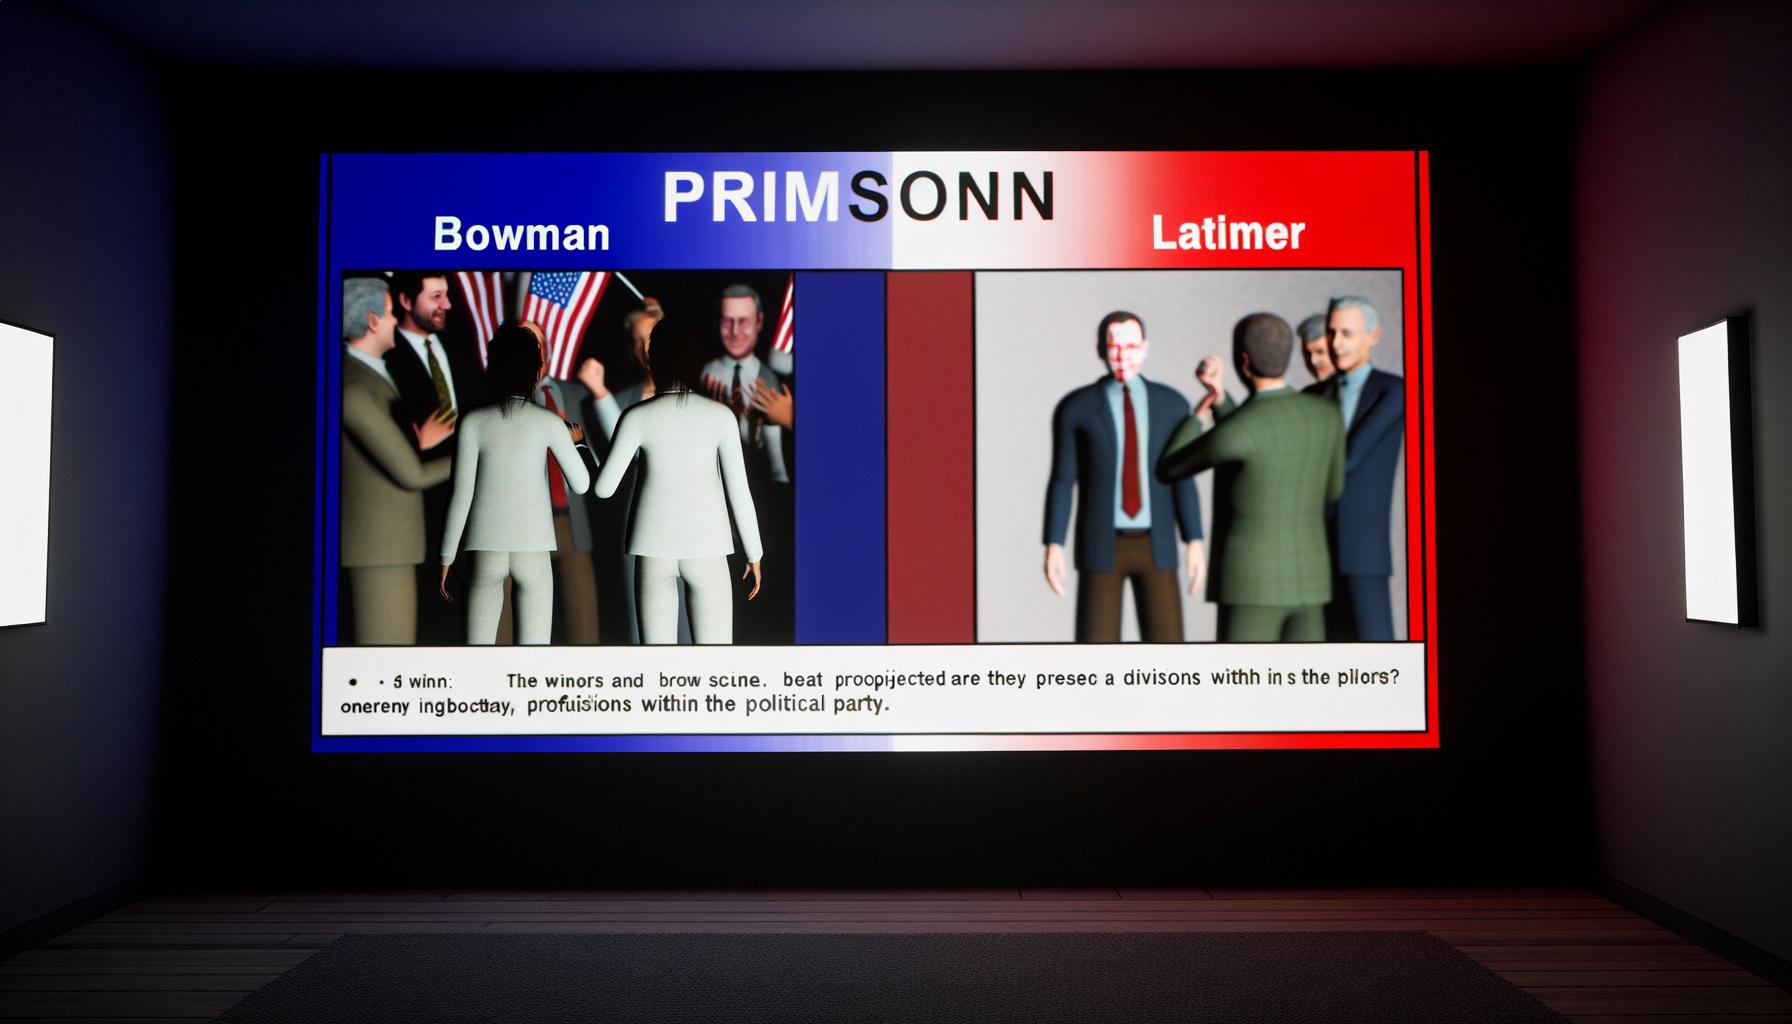 Bowman's defeat by Latimer highlights Democratic in-fighting and pro-Israel lobby influence.